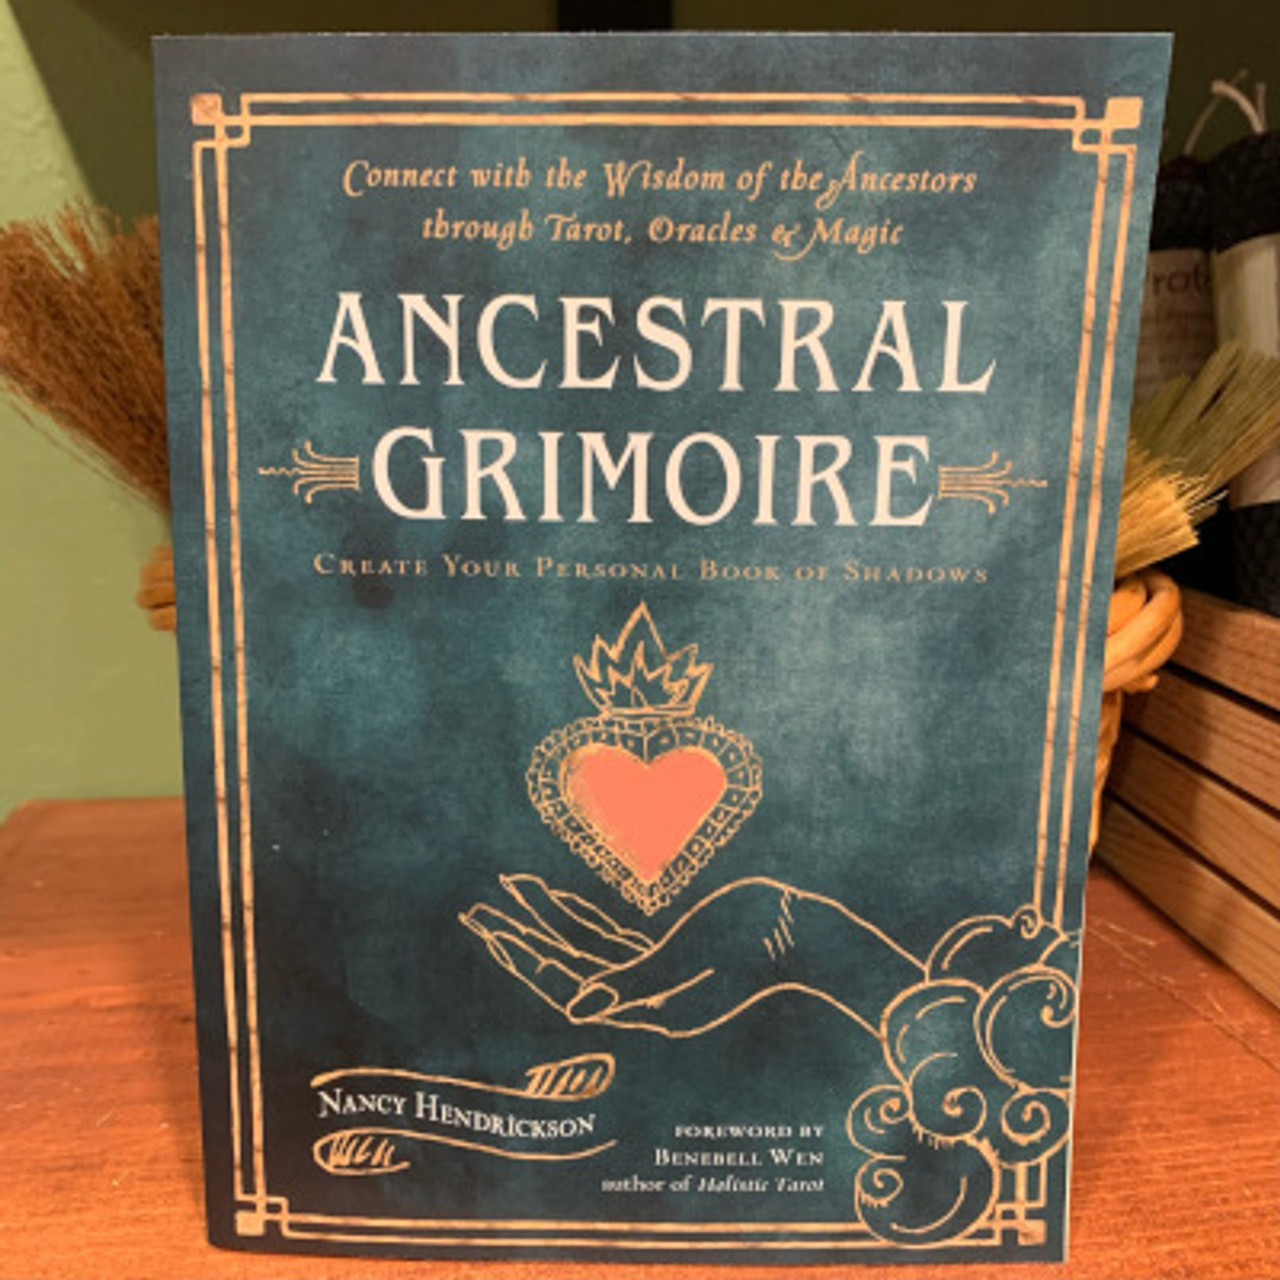 Ancestral Grimoire: Connect with the Wisdom of the Ancestors through Tarot,  Oracles, and Magic